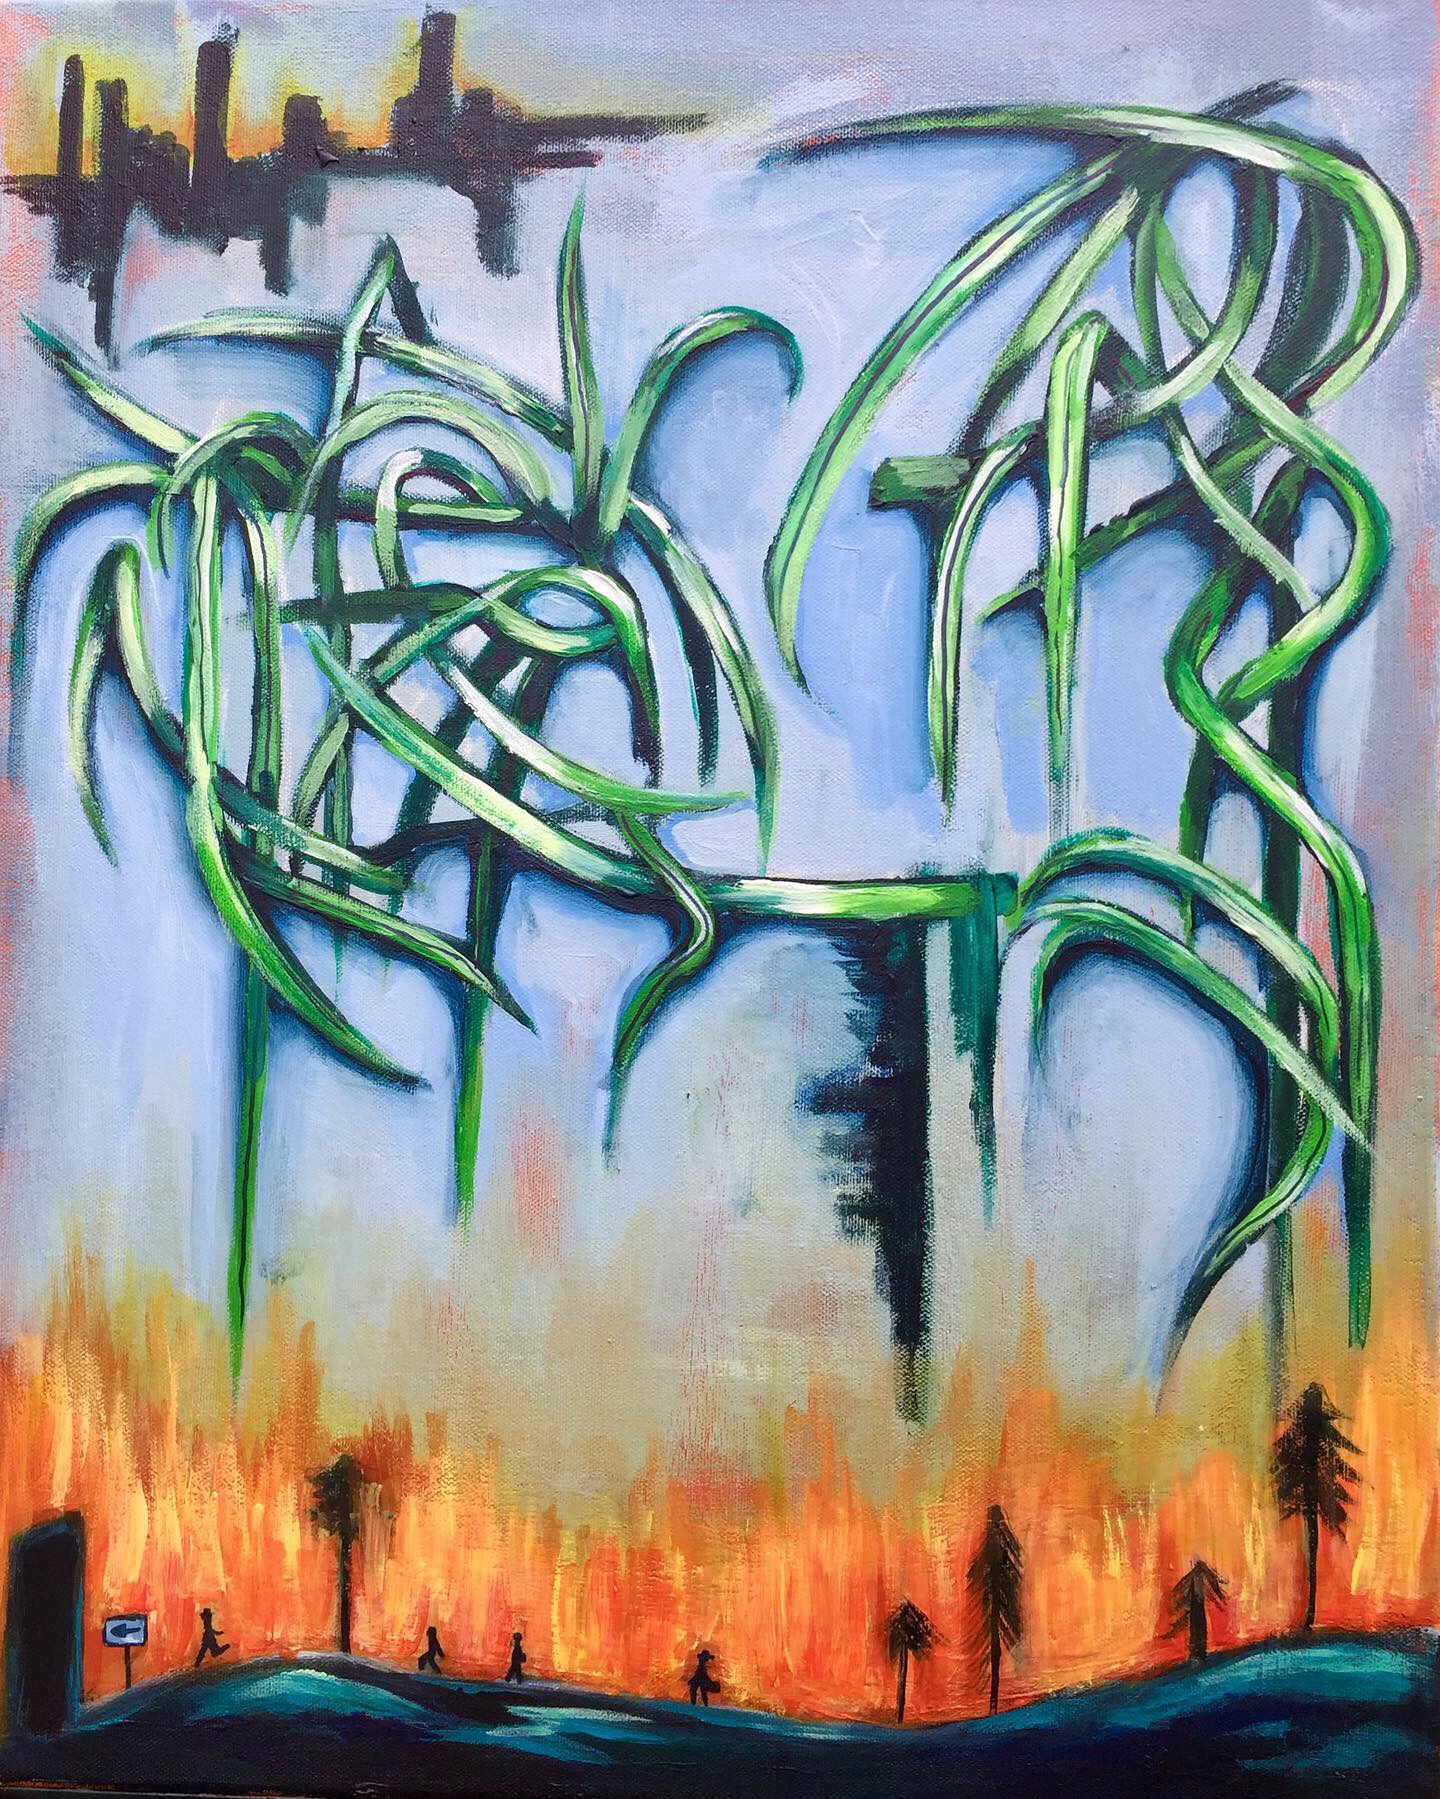 ‘Naive’ Acrylic painting on A2 canvas. This painting aims to symbolise deforestation and the systematic naivety, leaving behind the irreversible destruction they are causing to Mother Nature, blissfully ignorant to its greater importance, choosing greed.